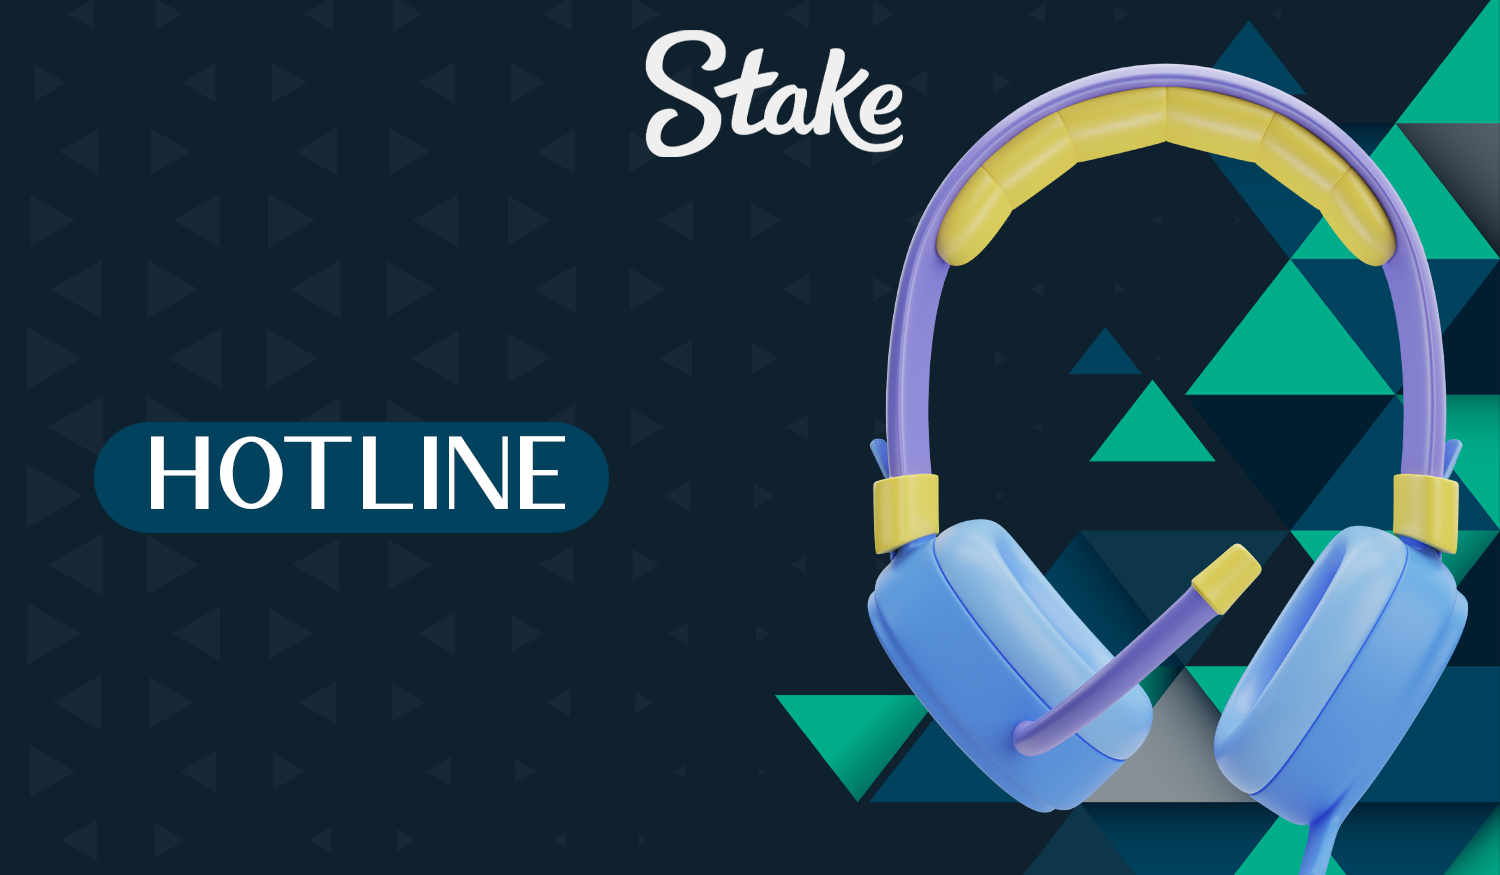 Features of the Stake bookmaker's hotline support